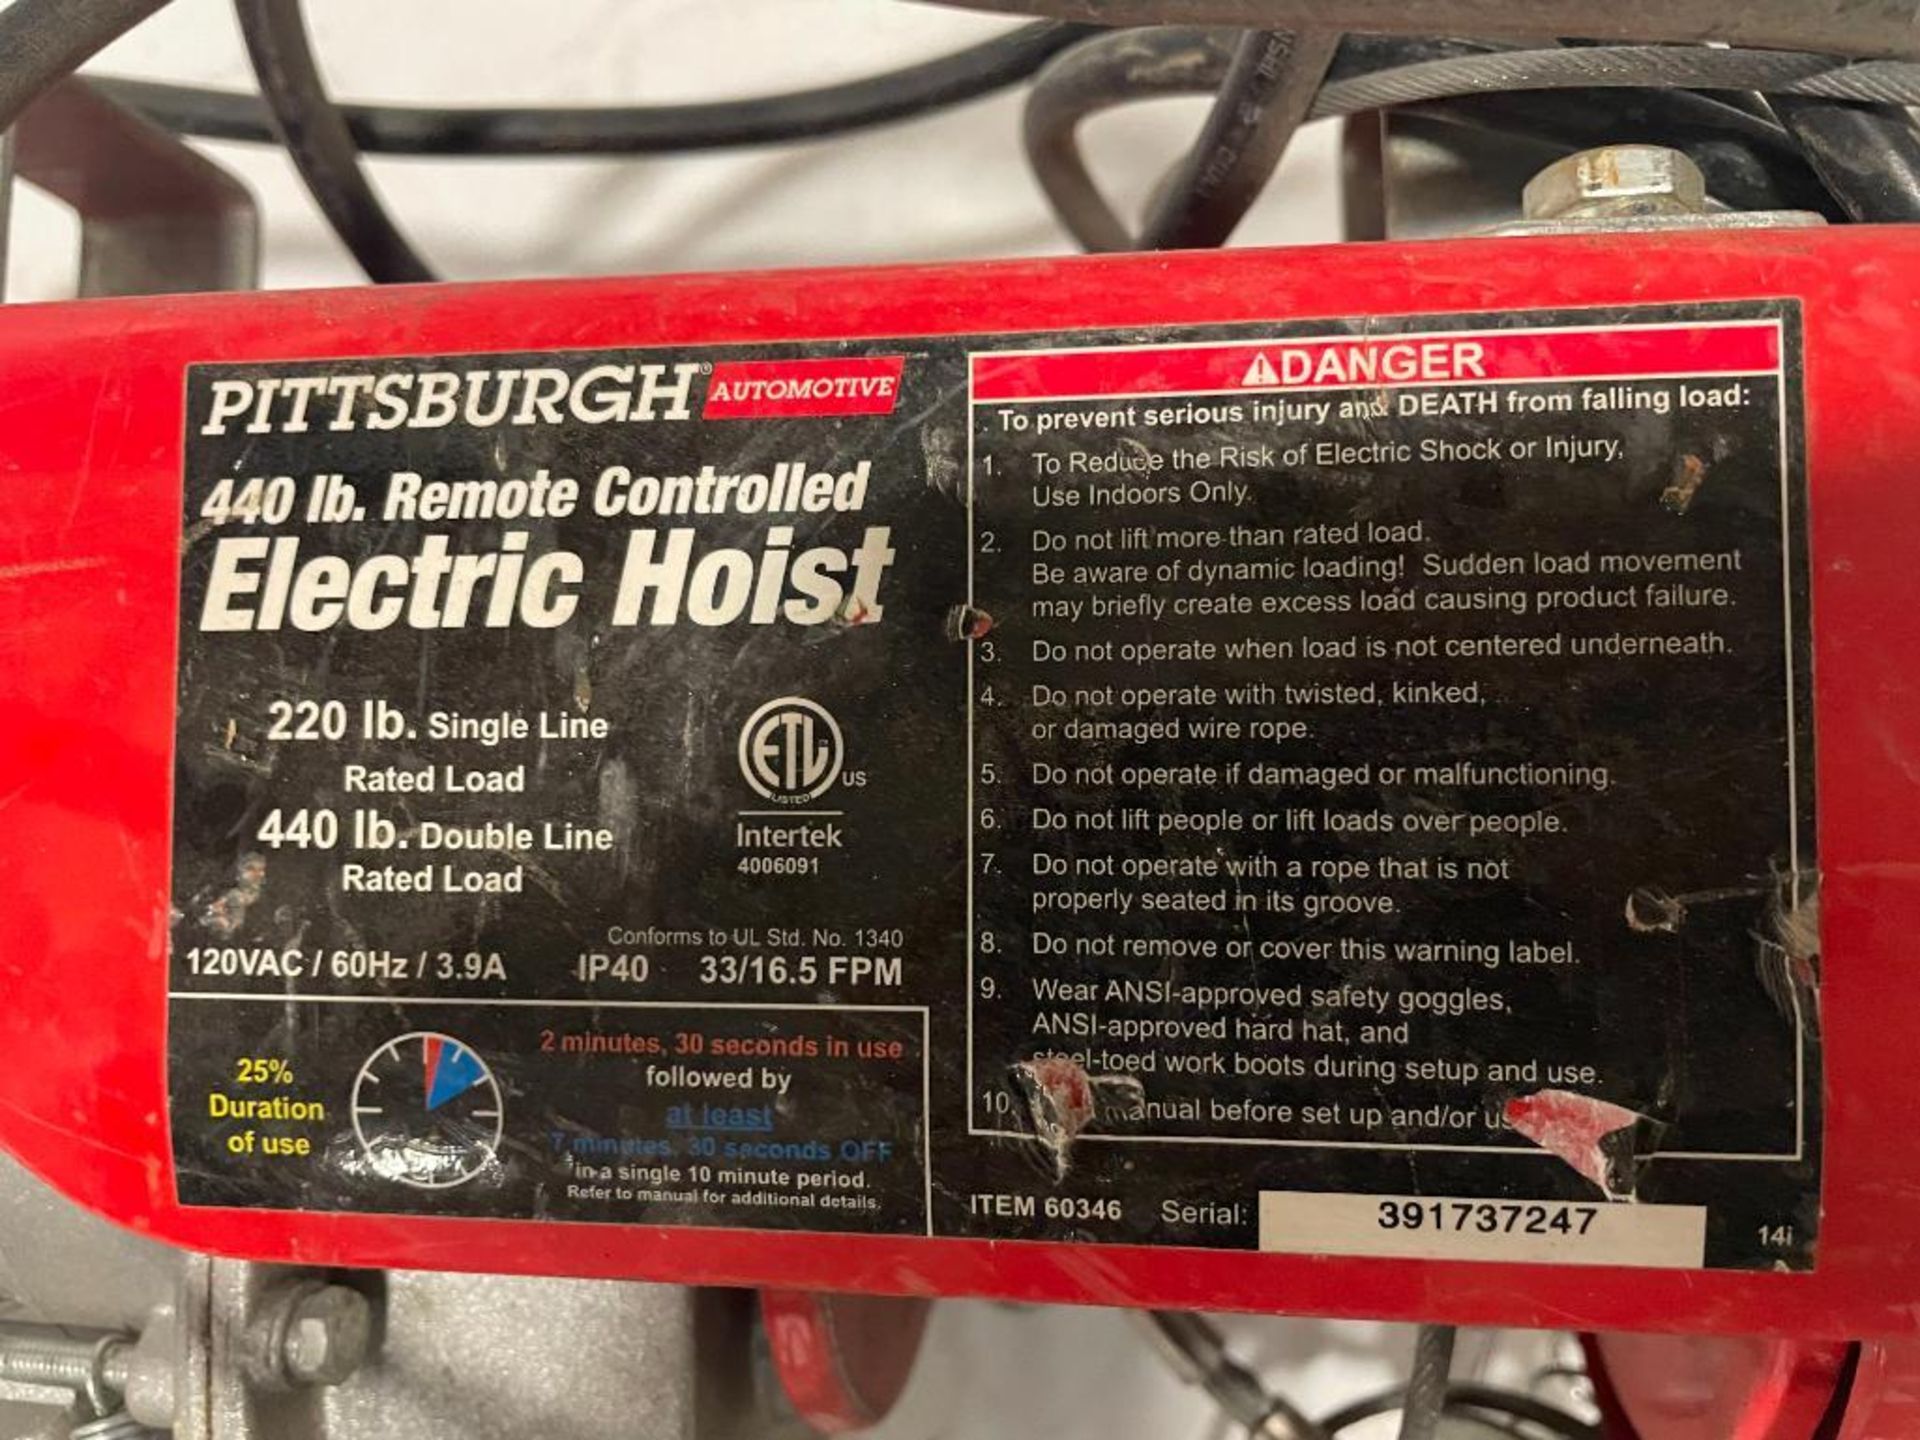 Pittsburgh 440 # Remote Controlled Electric Hoist, Serial #391737247, 220# Single Line & 440# Double - Image 4 of 4